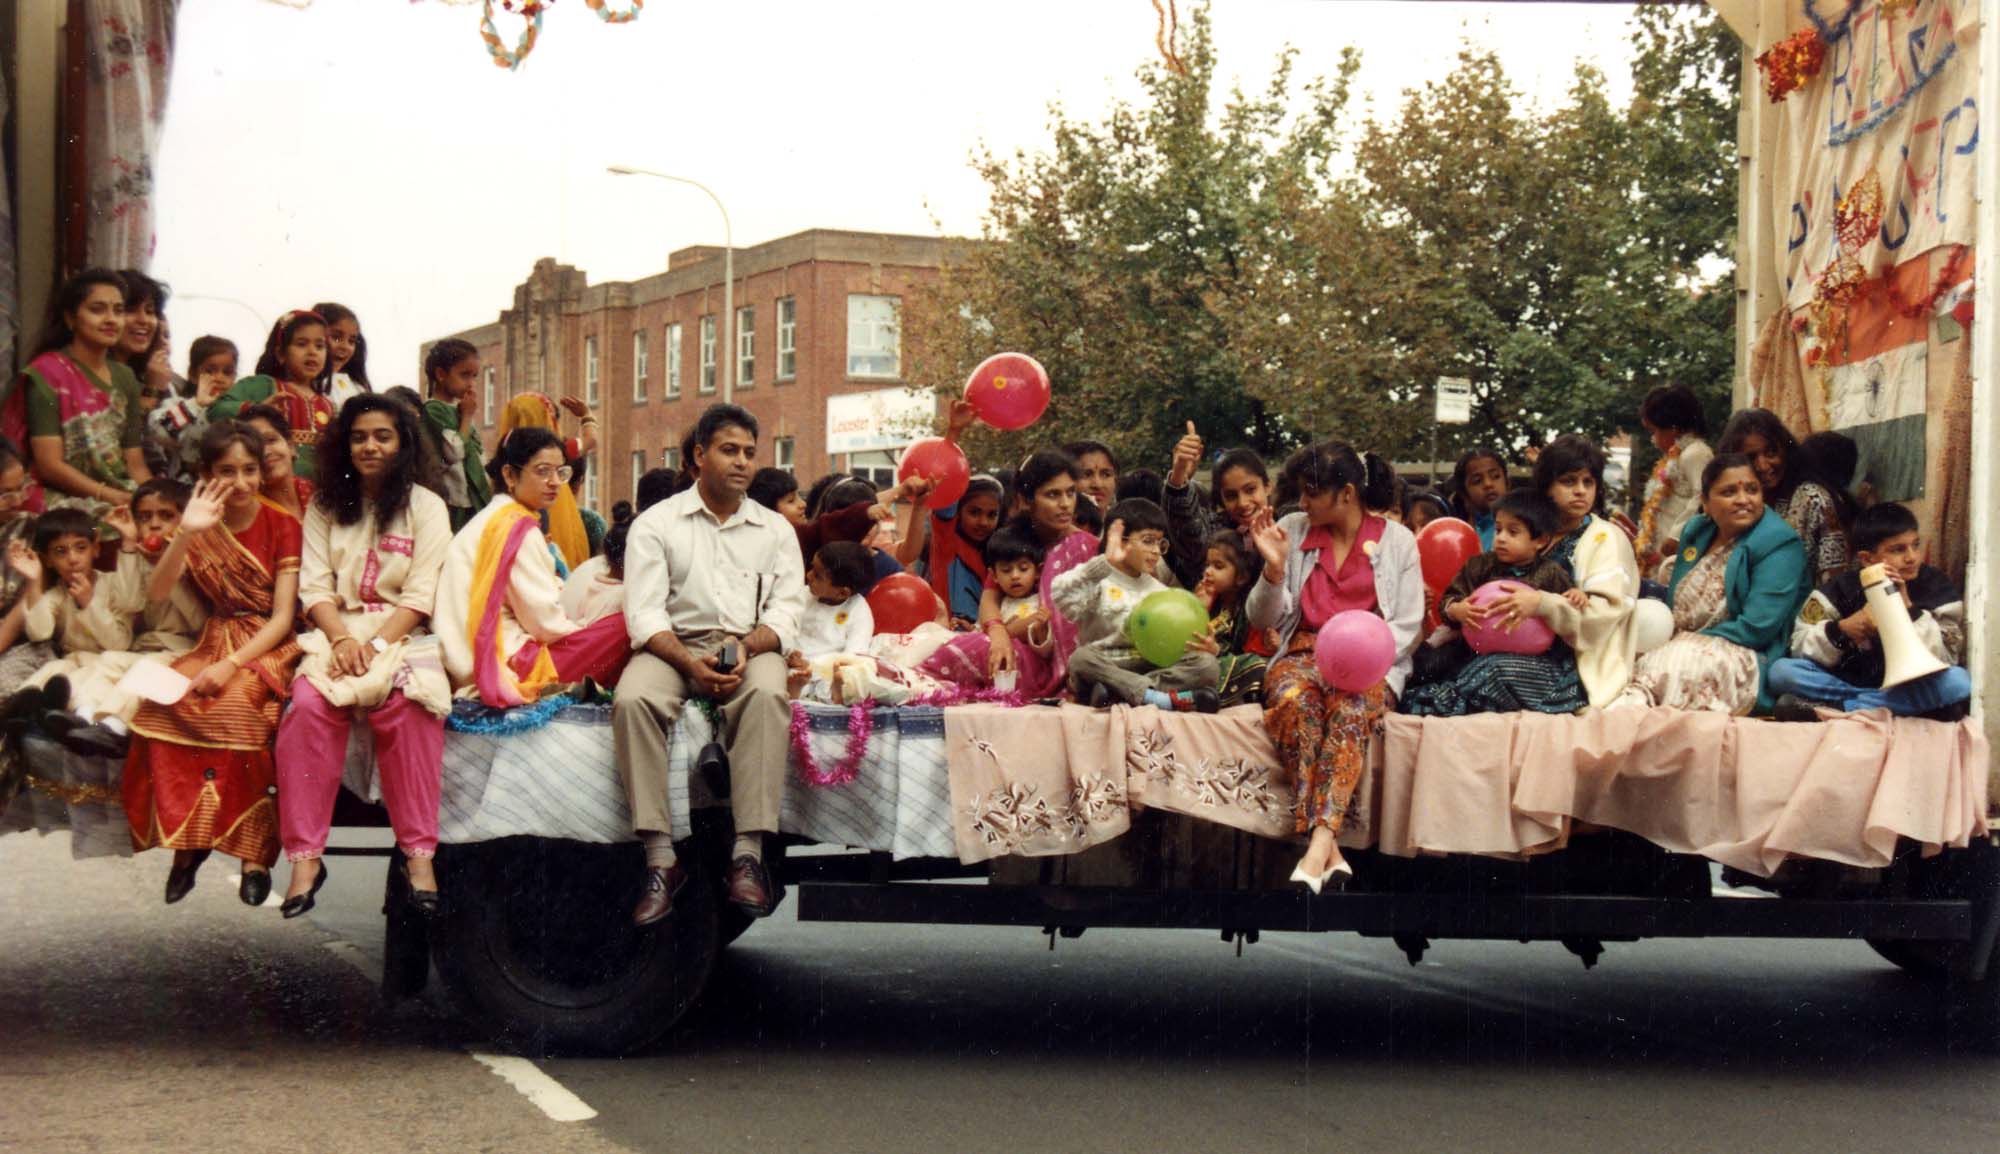 The Belgrave Neighbourhood Playgroup on a float in the Leicester Mela parade, early 1990s. -